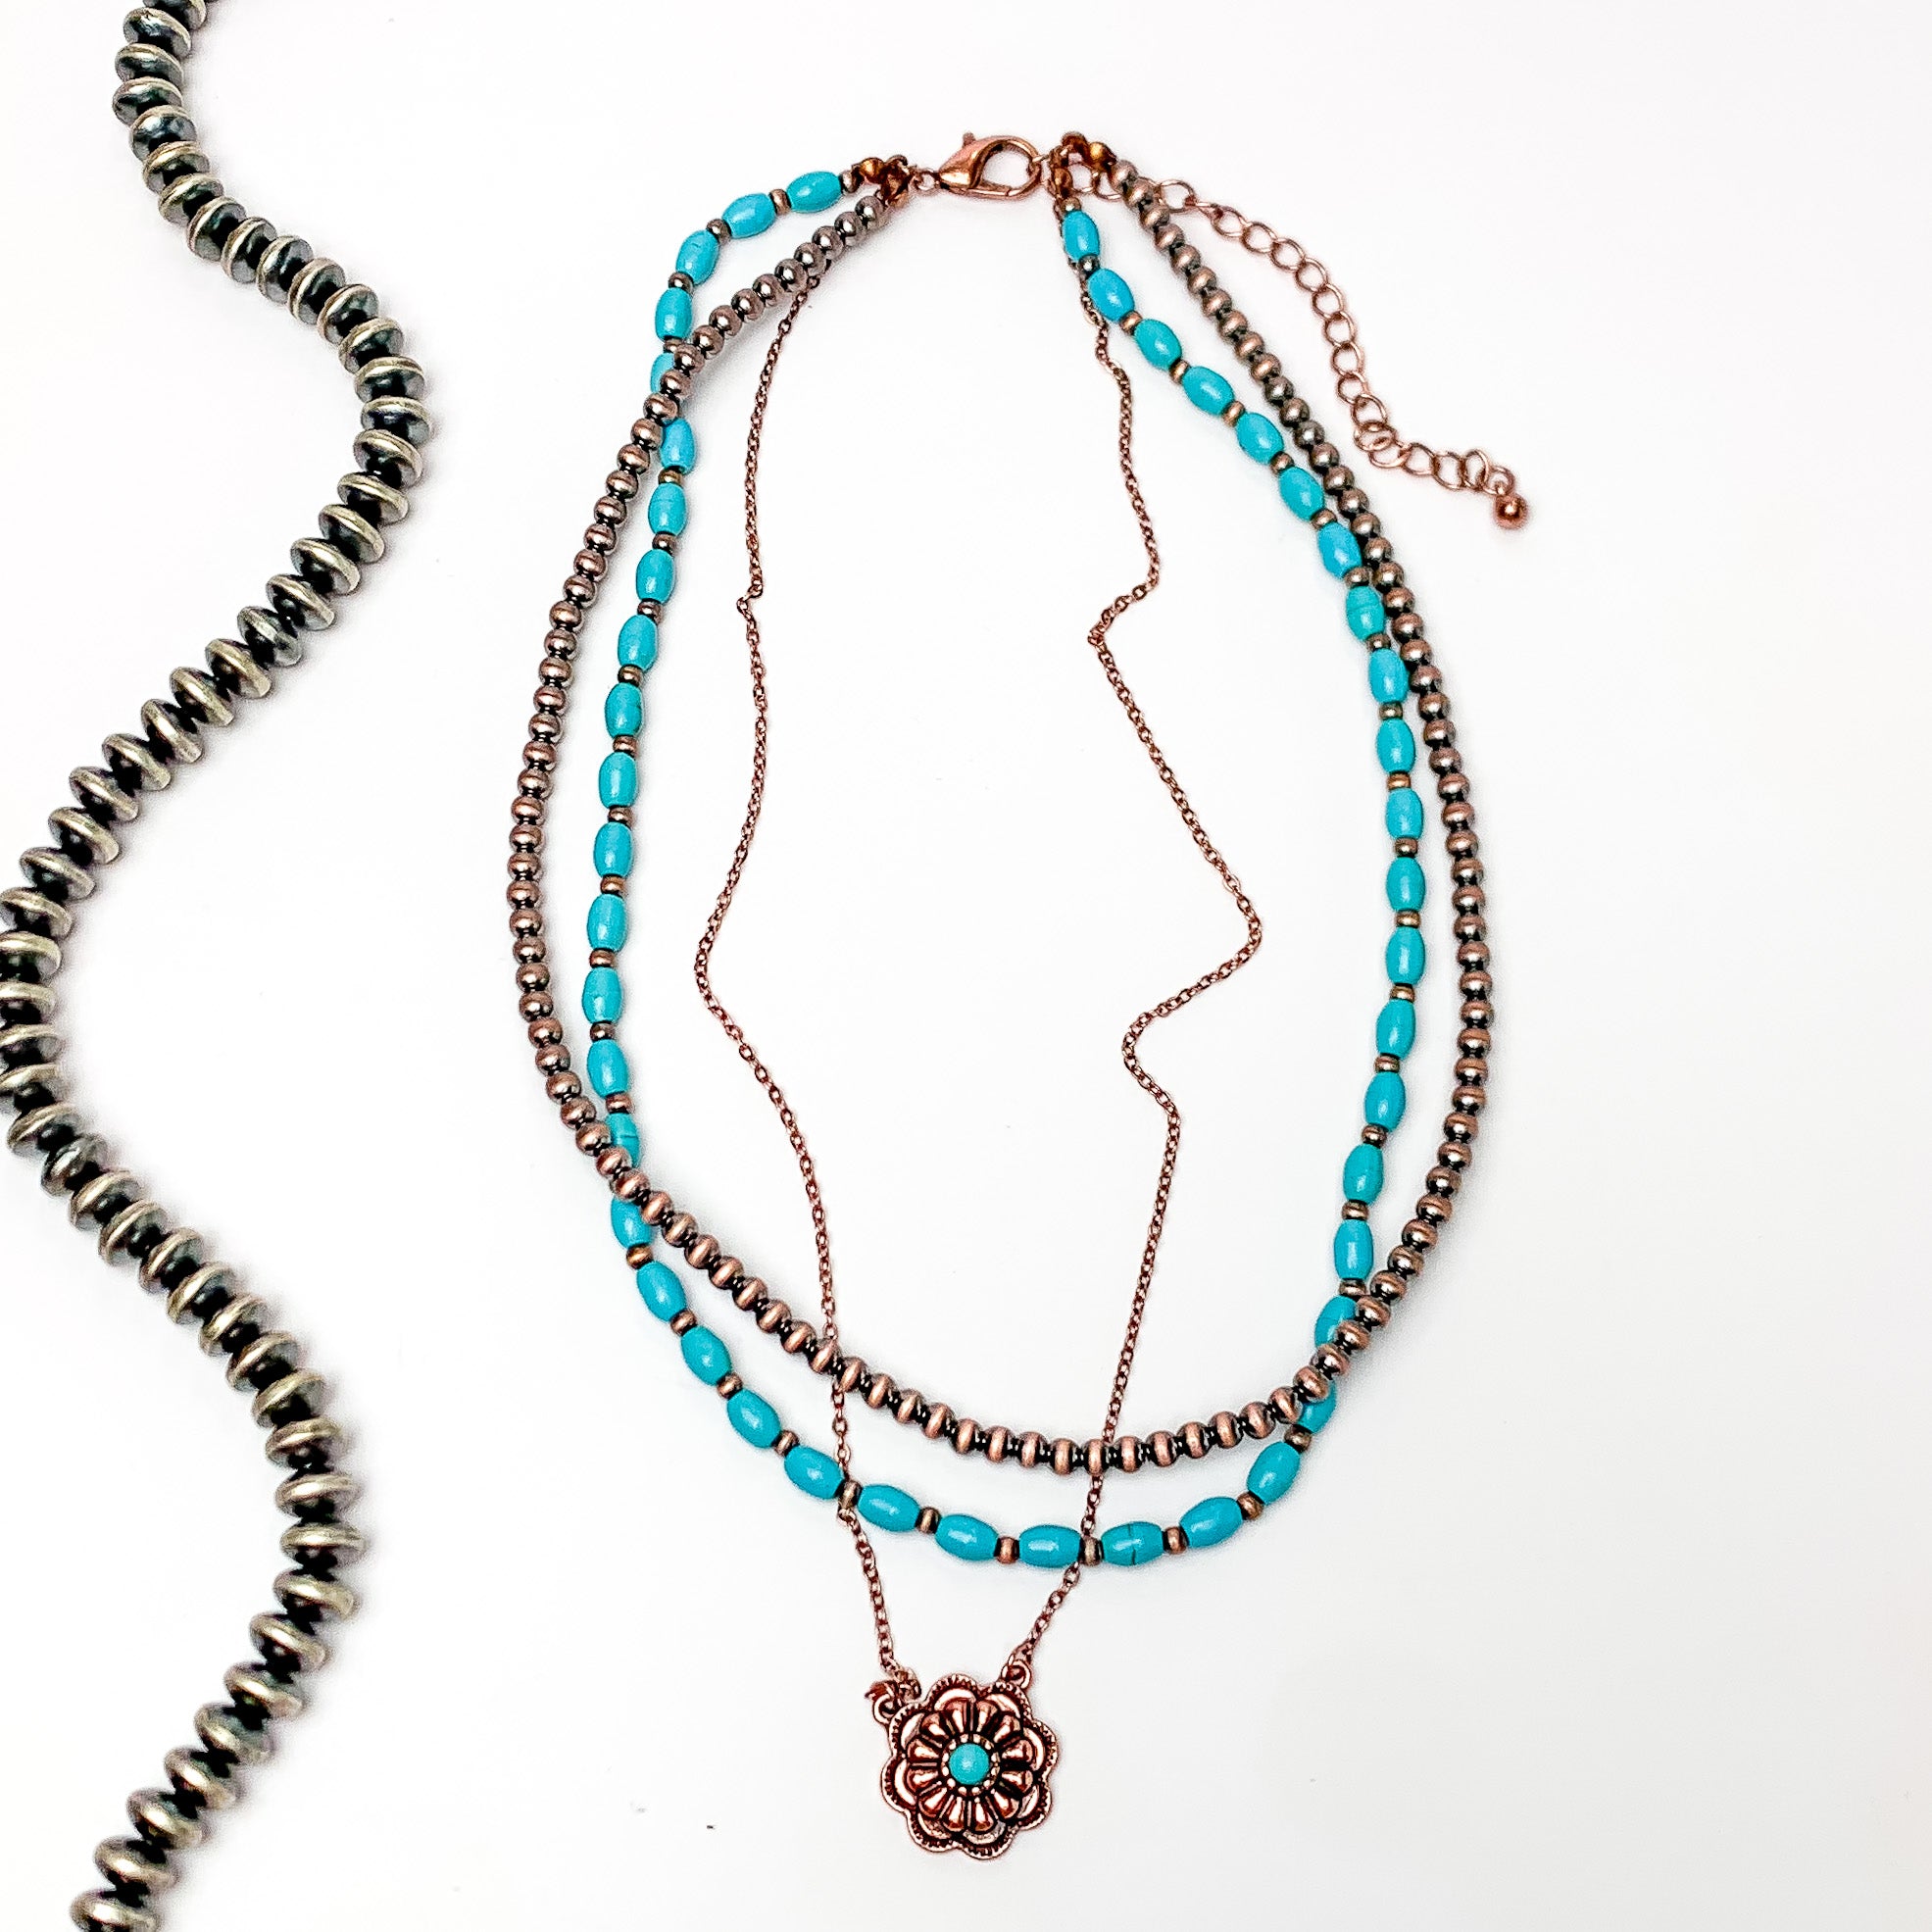 Multi strand necklace with faux navajo and turquoise beads and a dangling copper flower pendent with a turquoise stone in the middle. Pictured on a white background with a strand of copper beads to the left of it.